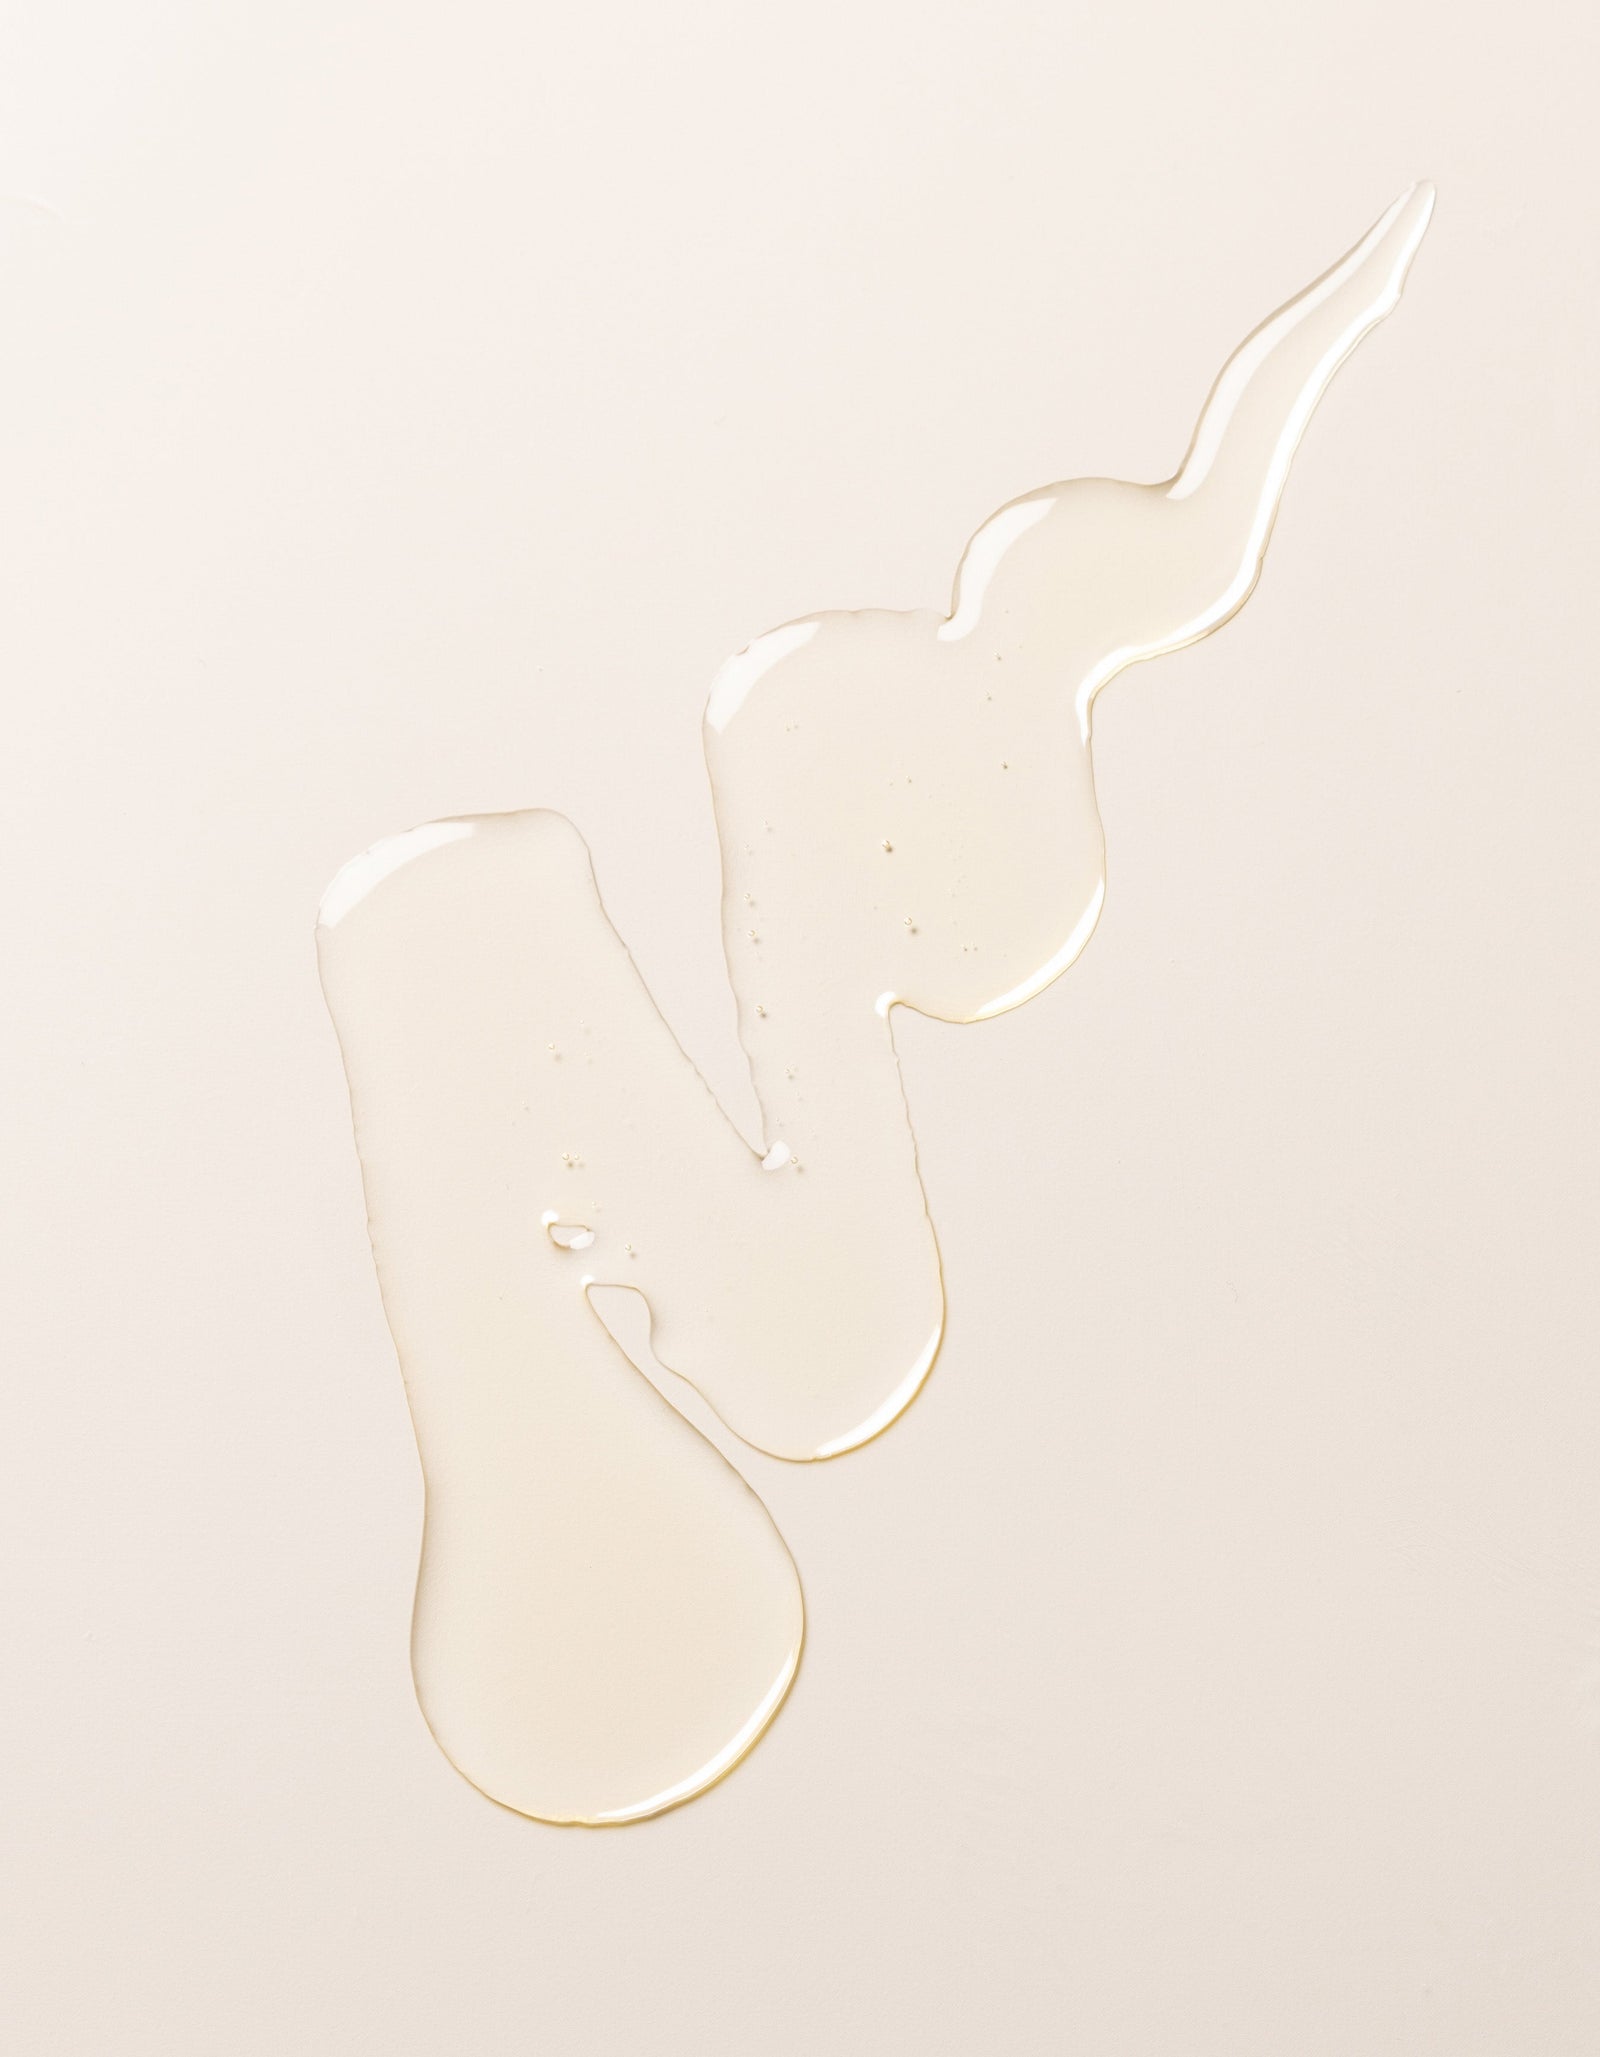 A swirl of transparent, light-colored Cozy Earth's Revitalizing Pair liquid on a plain, pale beige surface. The liquid forms irregular shapes with droplets at the ends, creating a visually interesting pattern.